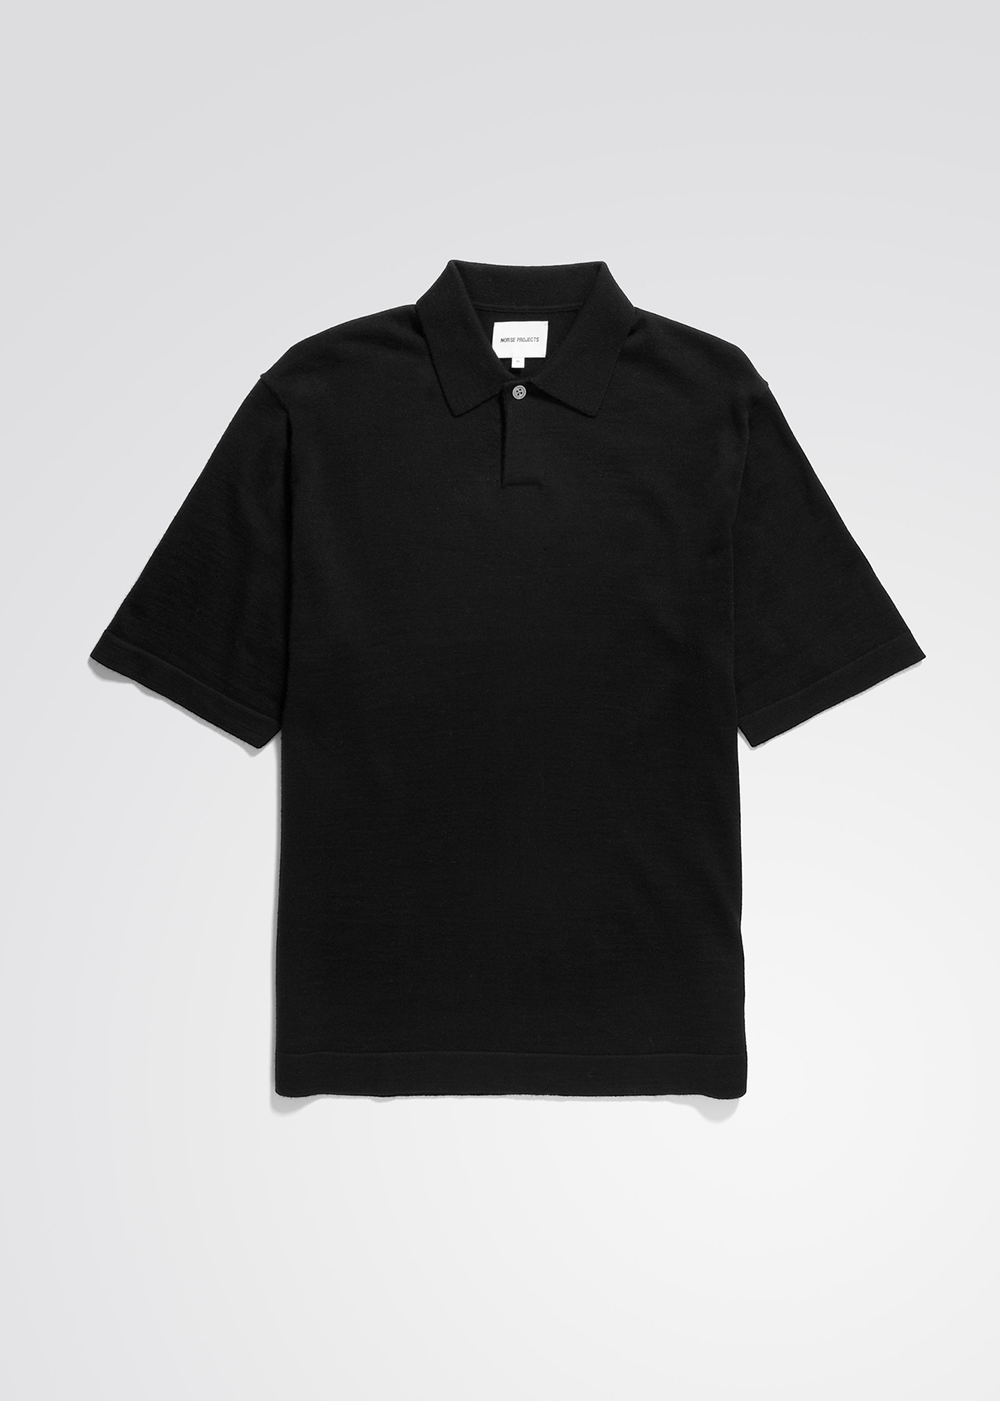 Black Merino Wool Short Sleeve Polo Shirt by Norse Projects.